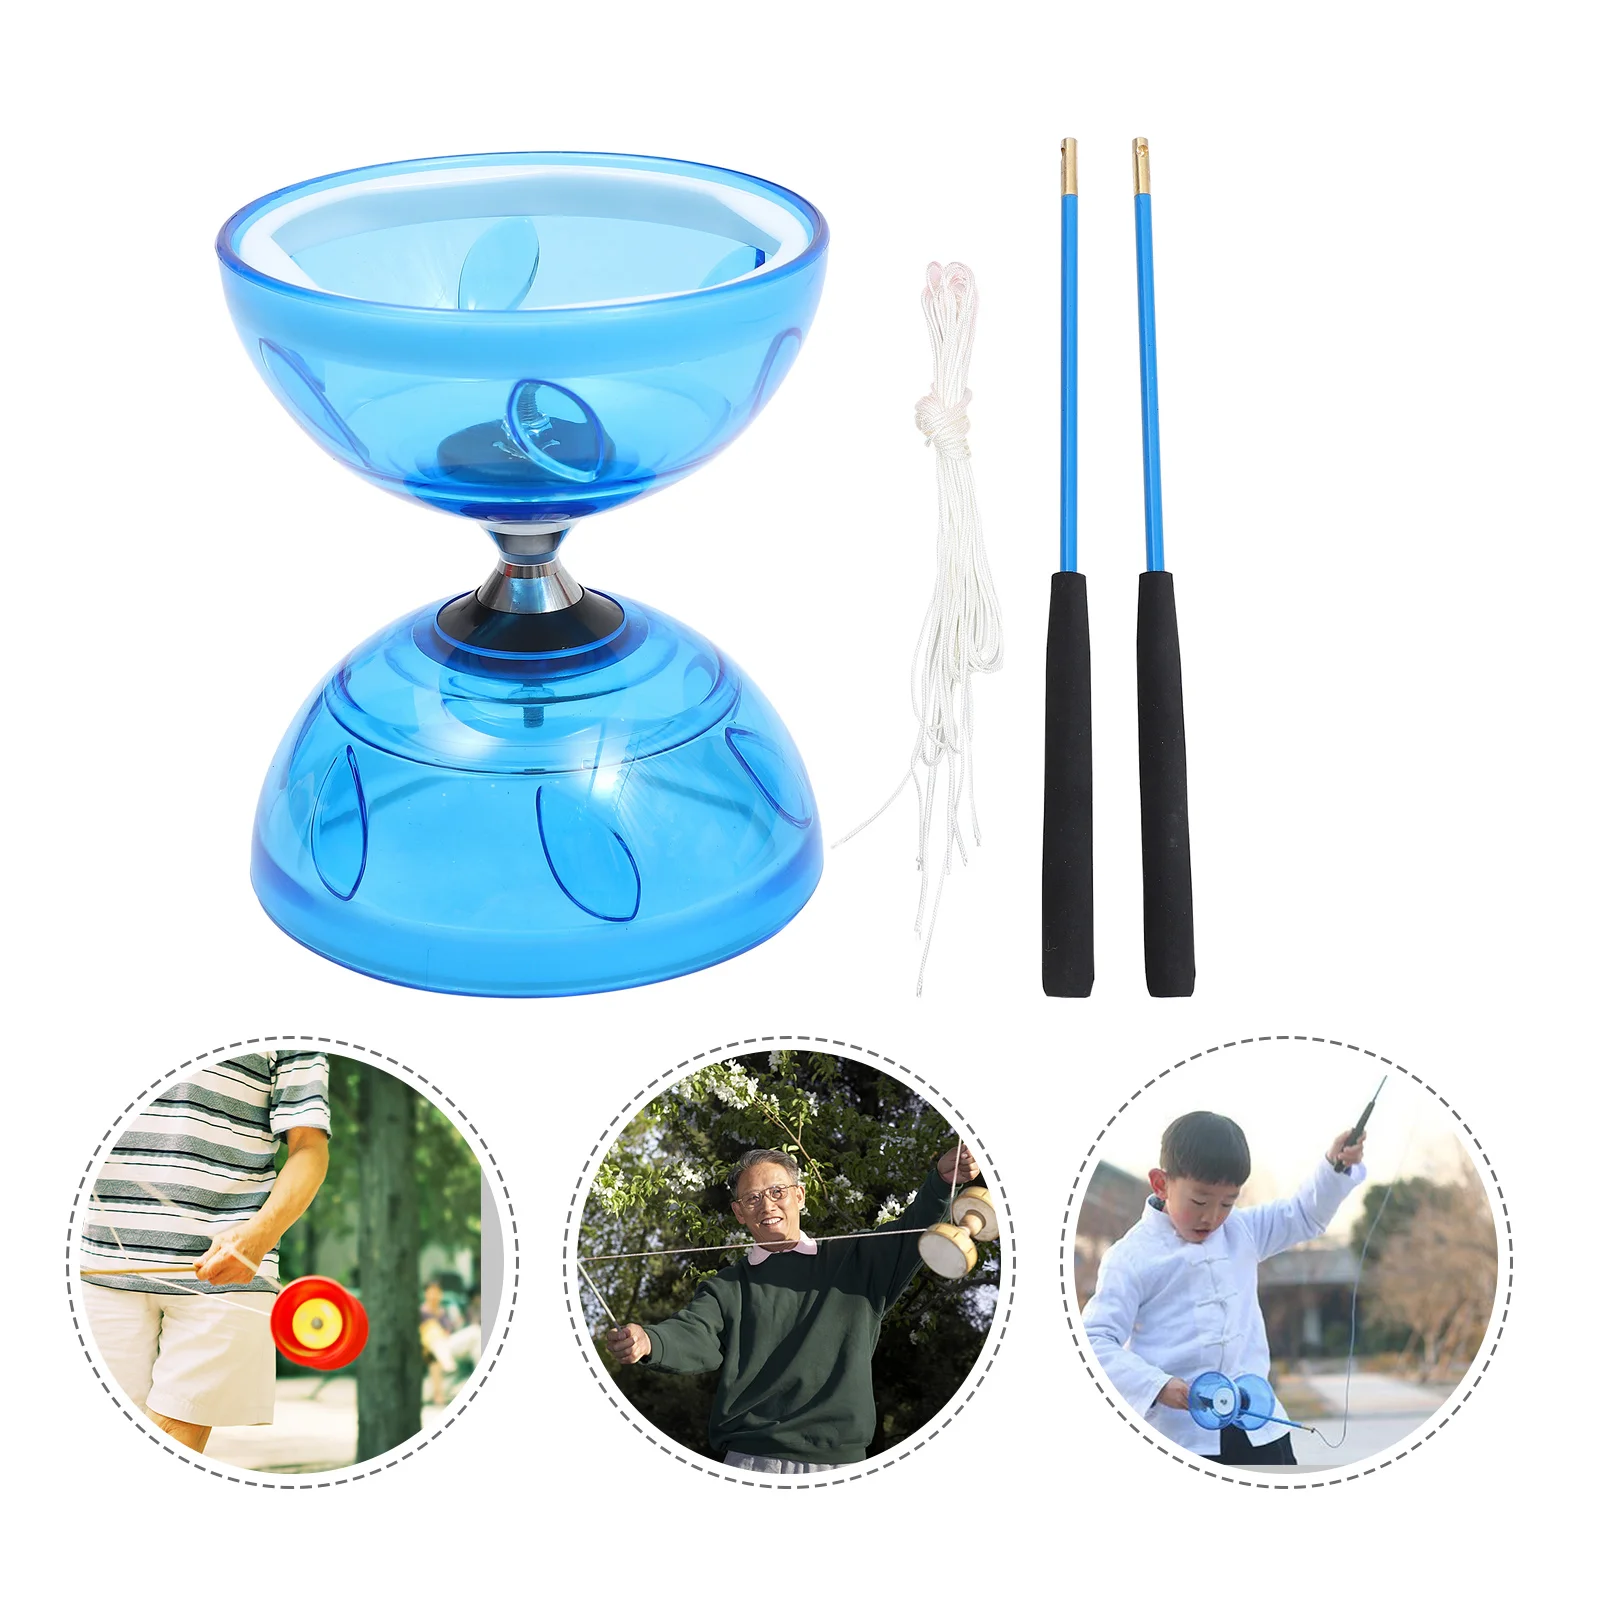 

Transparent Soft Rubber Diabolos Chinese Children's Beginner's Living Axis Double-ended Yoyo Diabolo Juggling Fitness Toy